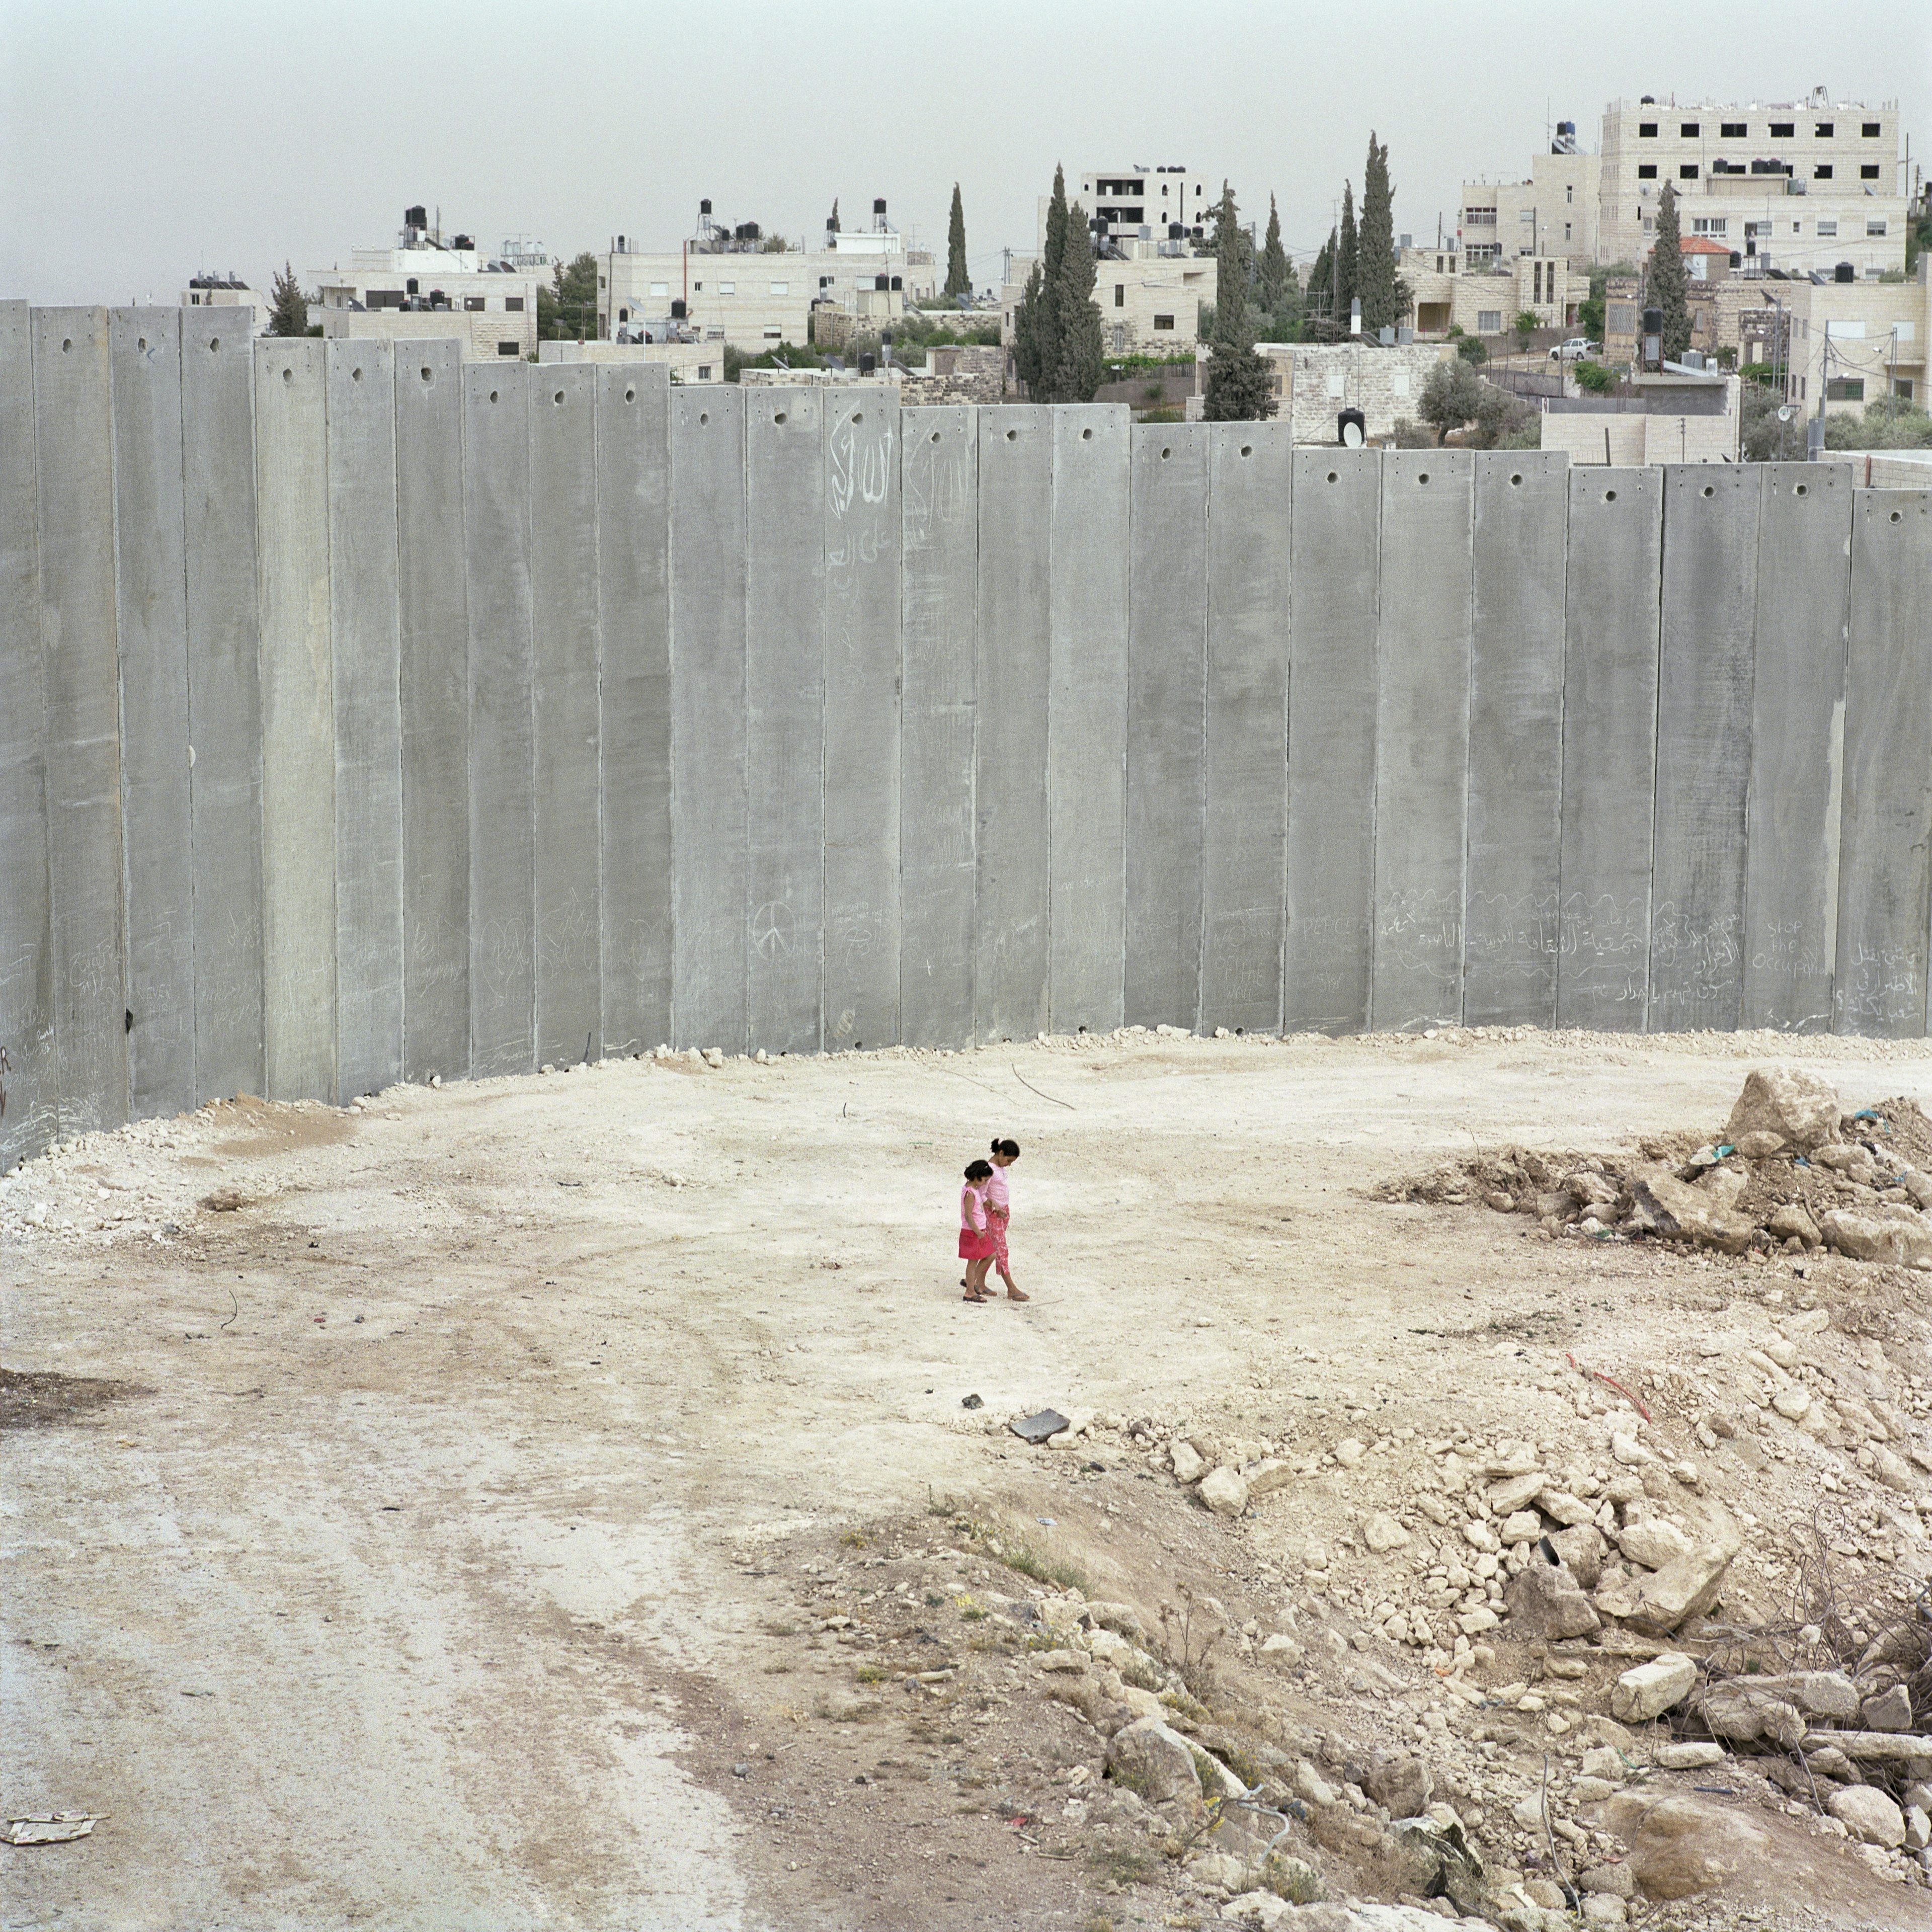 Magnum 75 #27 by Alessandra Sanguinetti. Abu Dis, West Bank. 2004